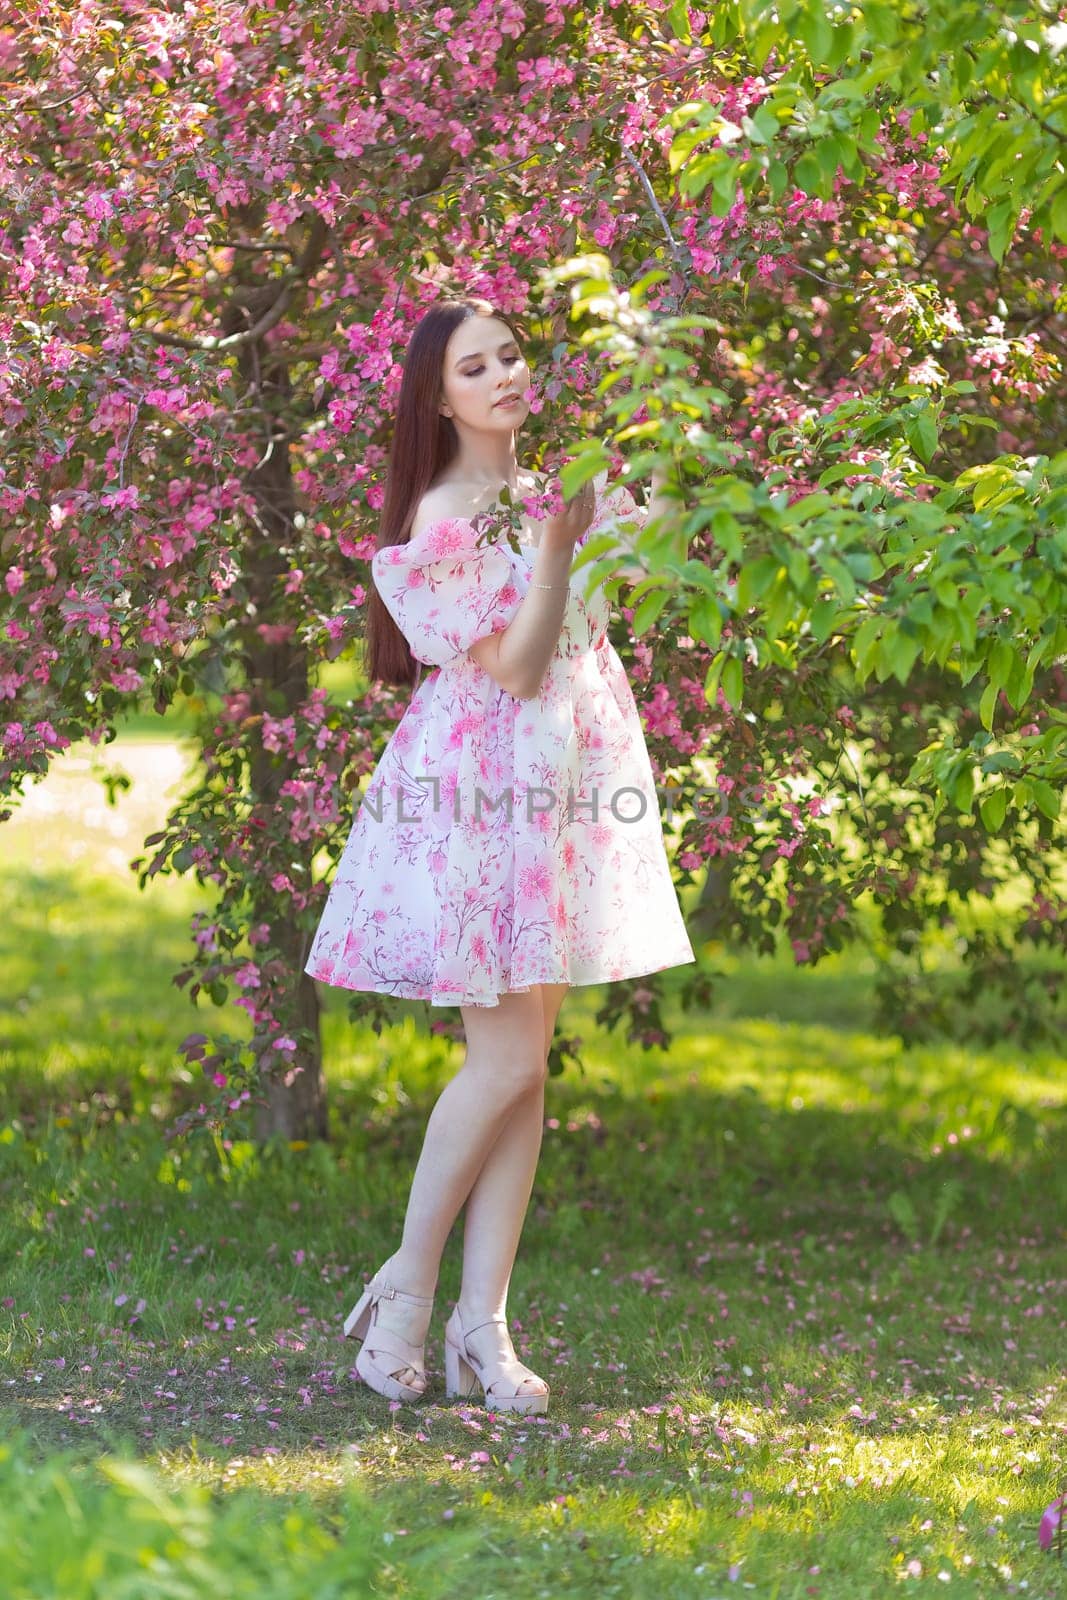 A elegant girl in a light pink dress standing near pink blooming trees, holding a blooming branch, in the garden. Vertical. Close up. Copy space